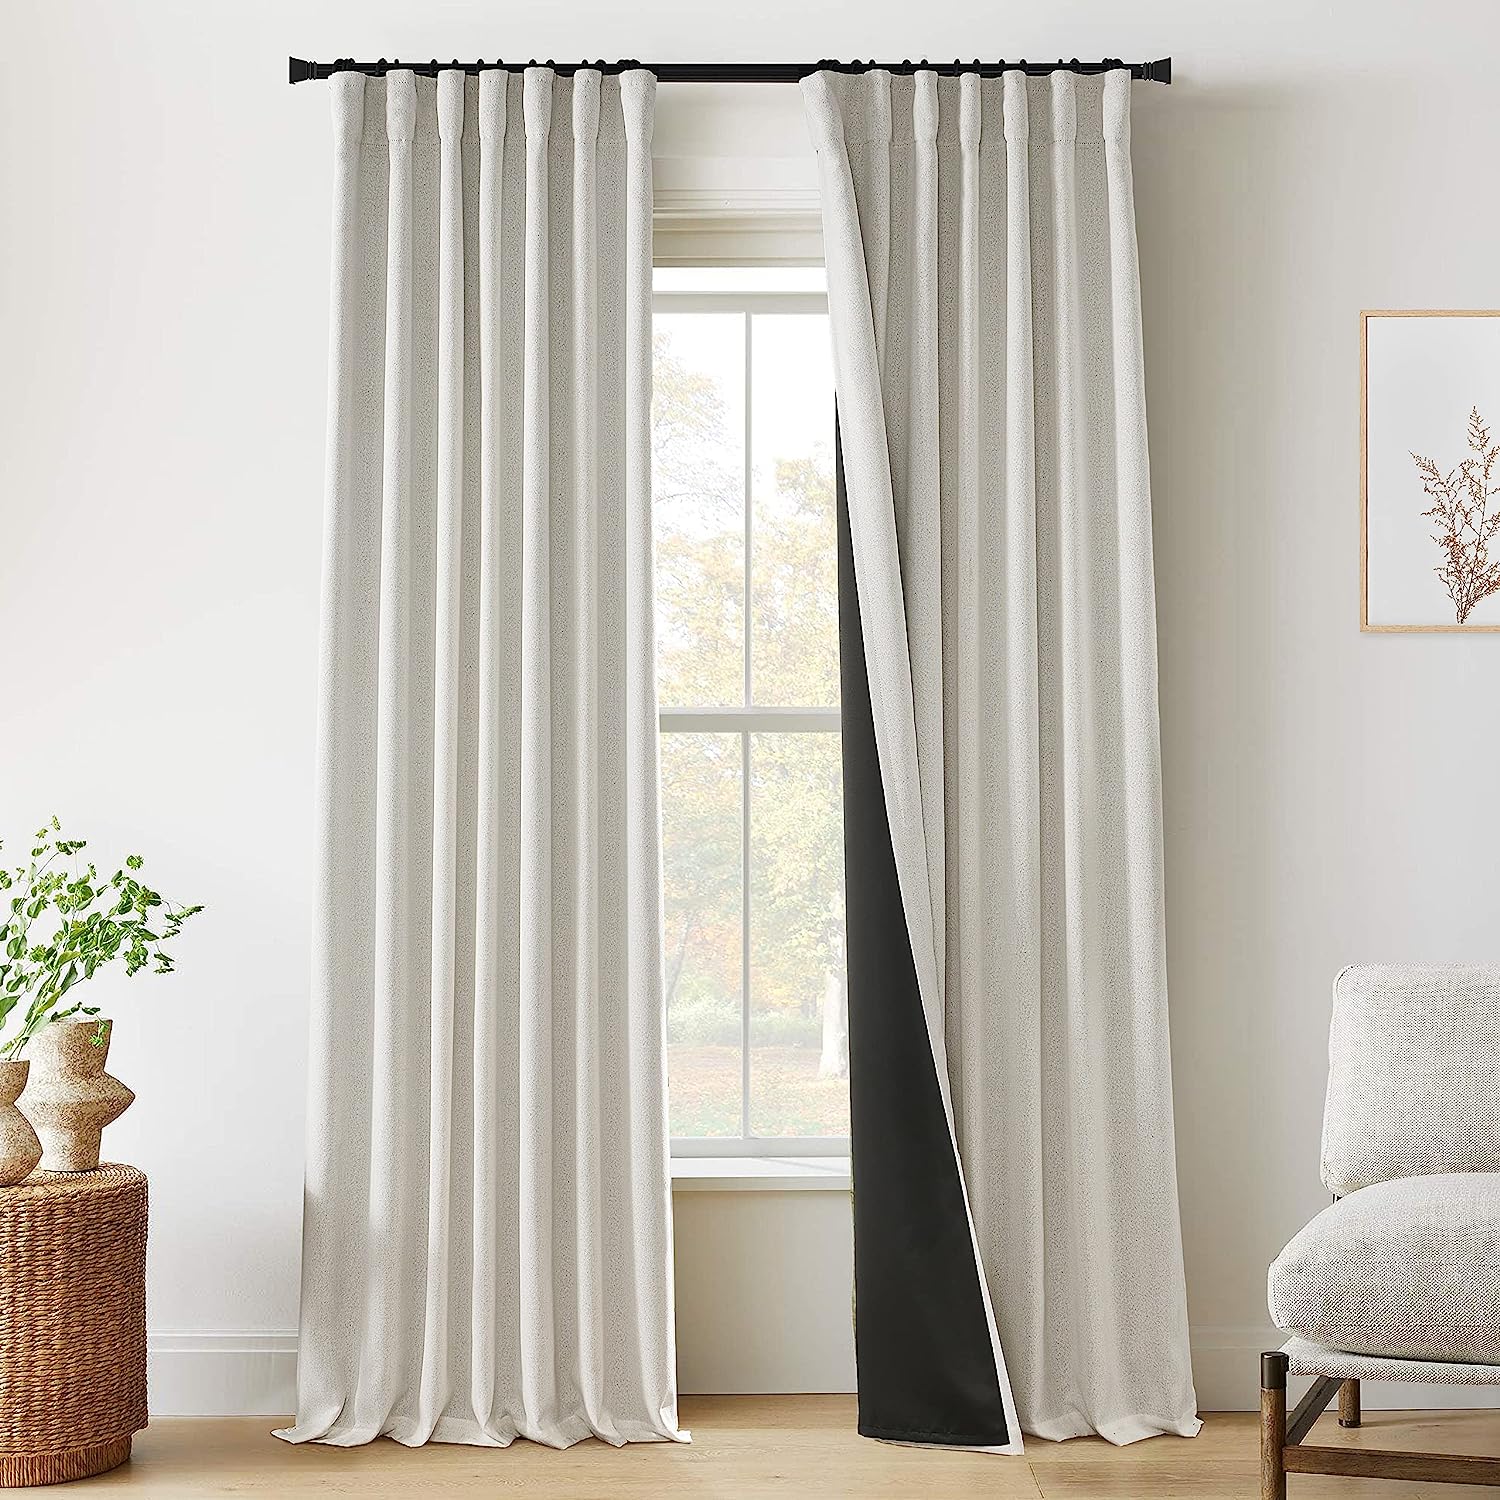 Cream Beige 100% Blackout Curtains 84 Inches Long for [...]